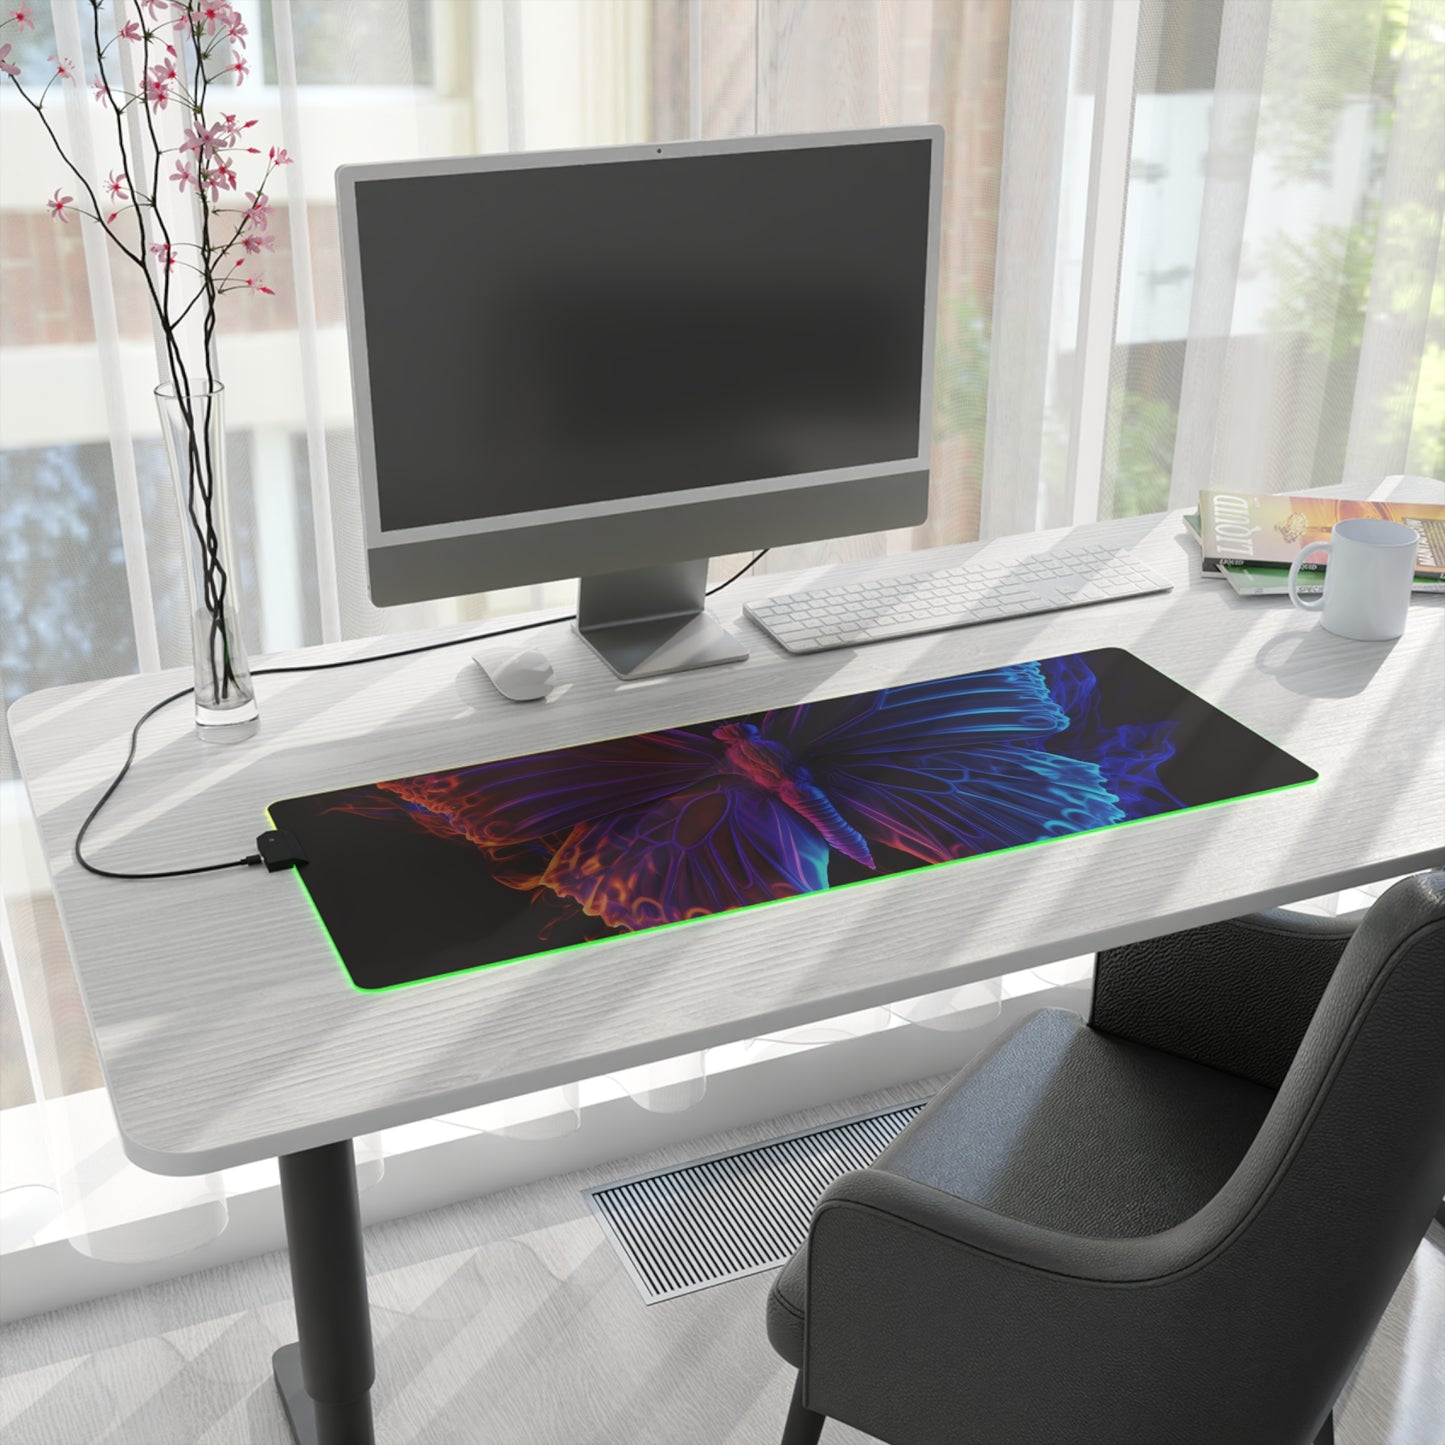 LED Gaming Mouse Pad Thermal Butterfly 1